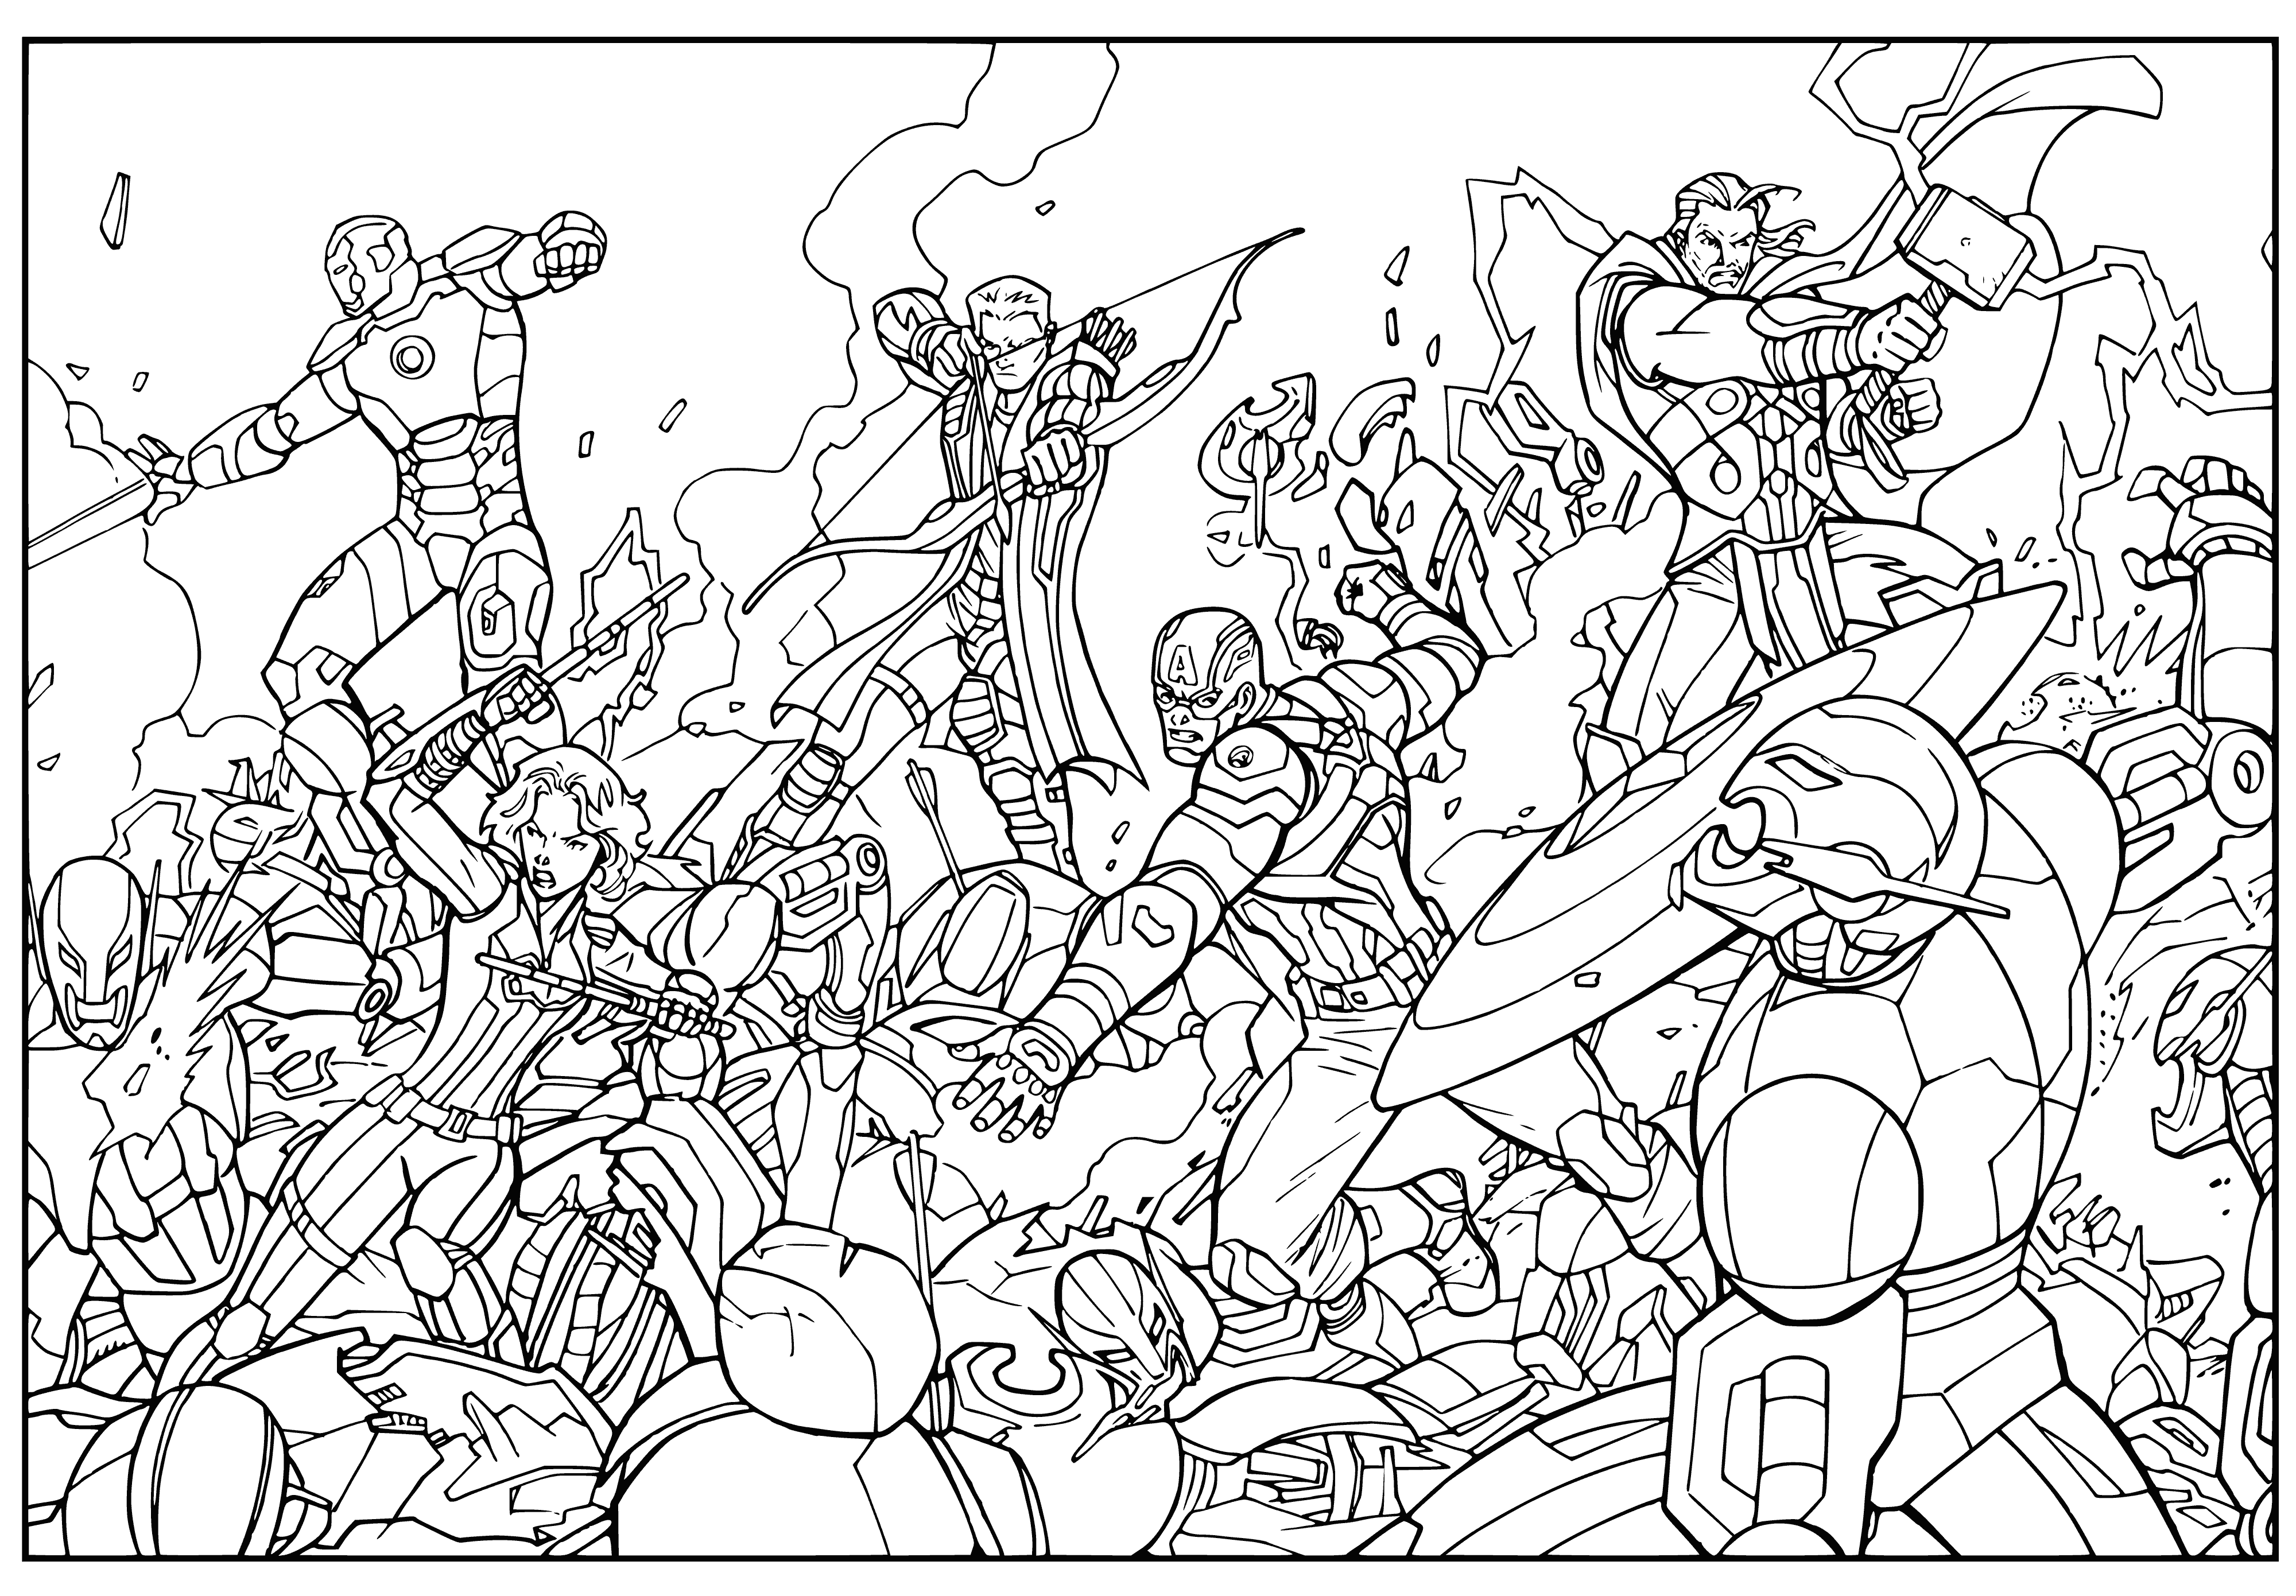 coloring page: Avengers line up to fight Ultron's army: Cap's shield, Thor's hammer, BW, Hulk, Hawkeye—ready to battle! #AvengersAssemble